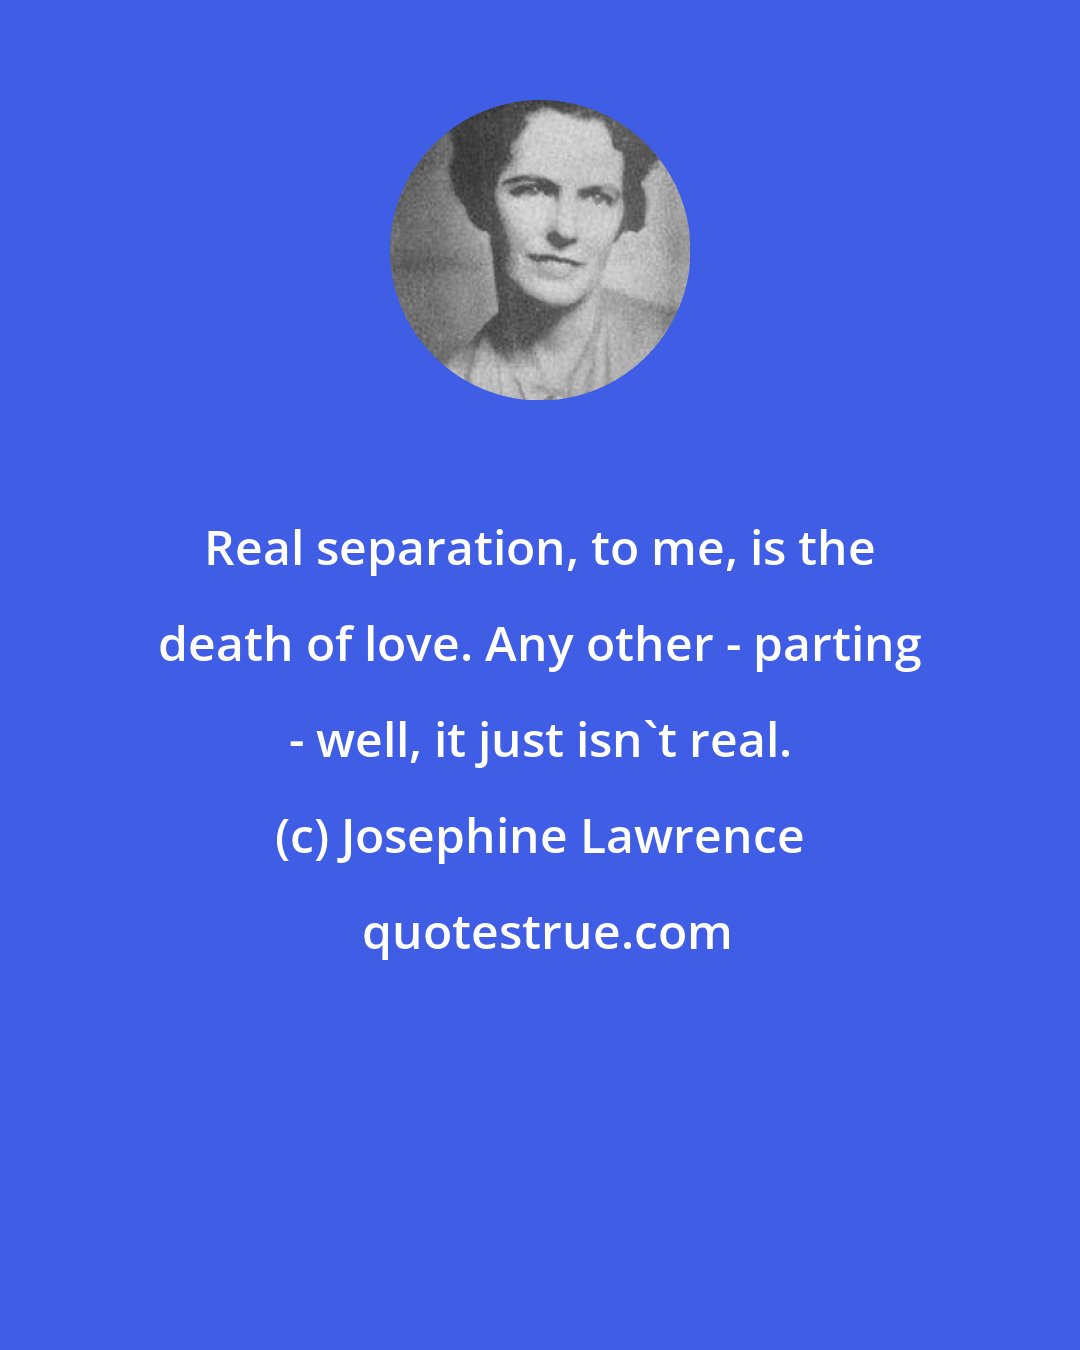 Josephine Lawrence: Real separation, to me, is the death of love. Any other - parting - well, it just isn't real.